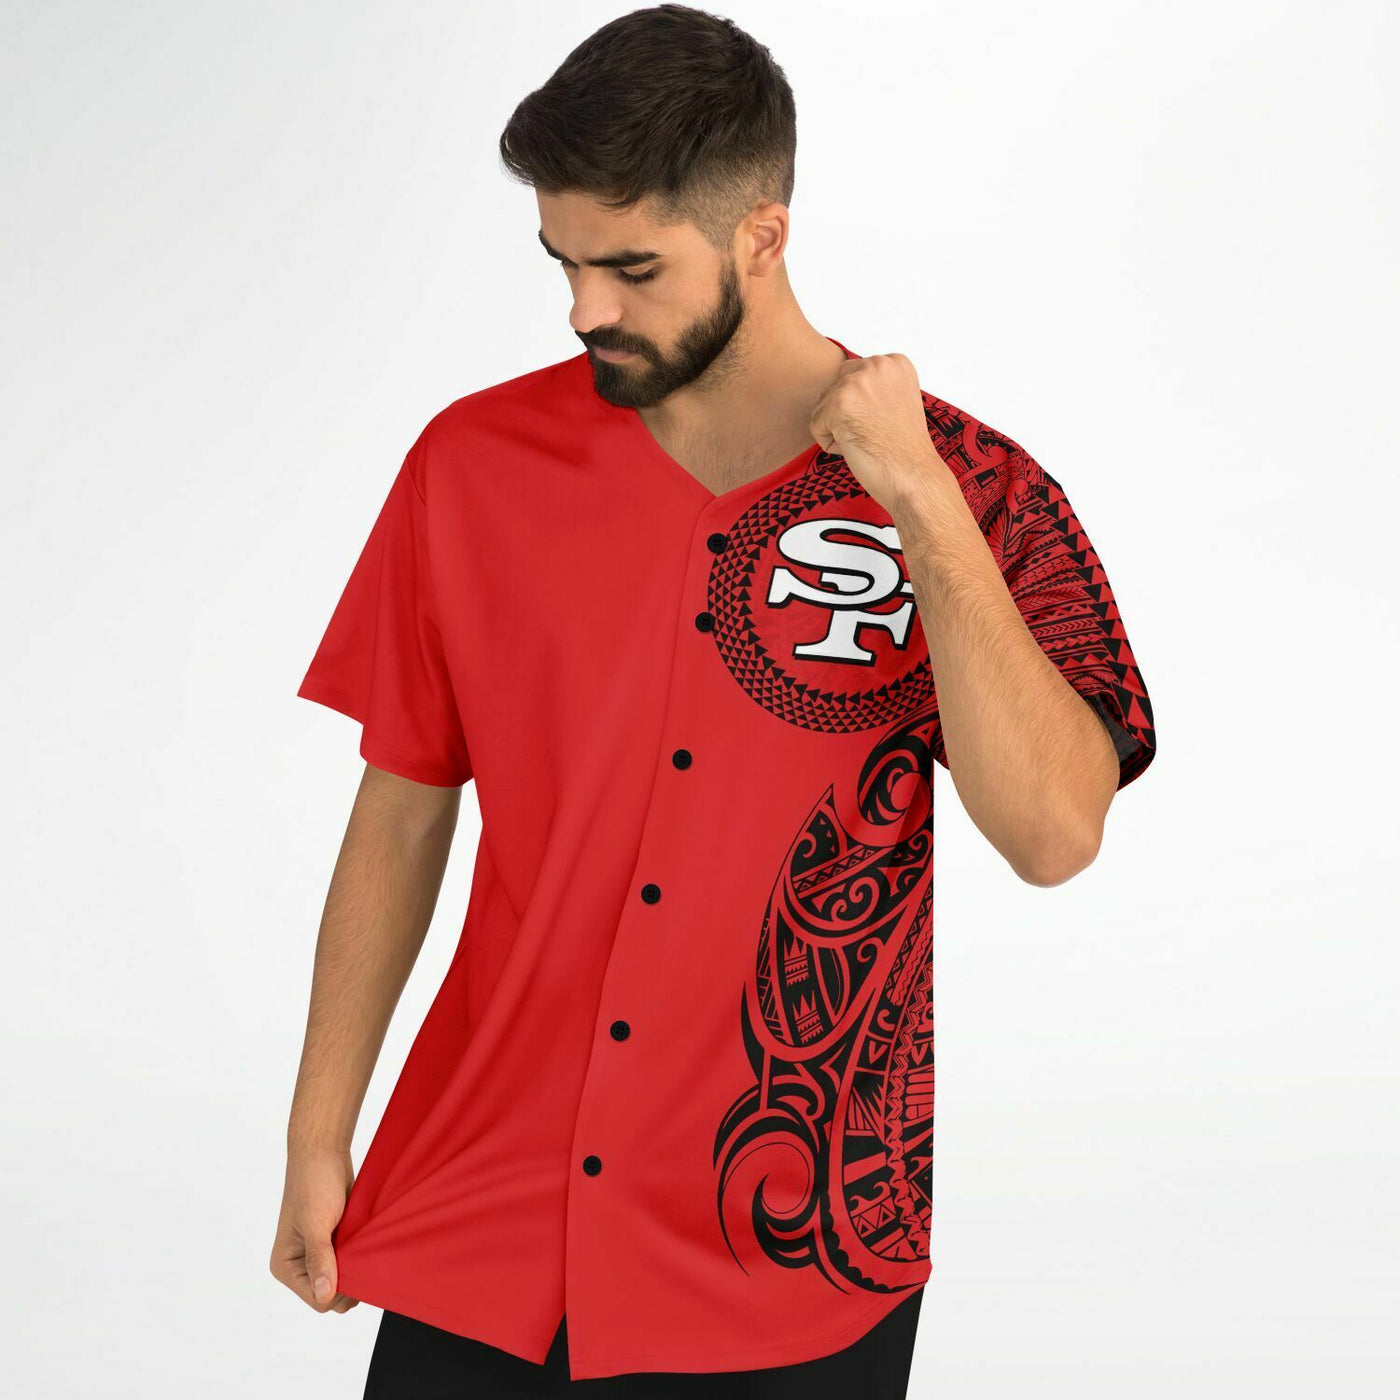 49ers red shirt